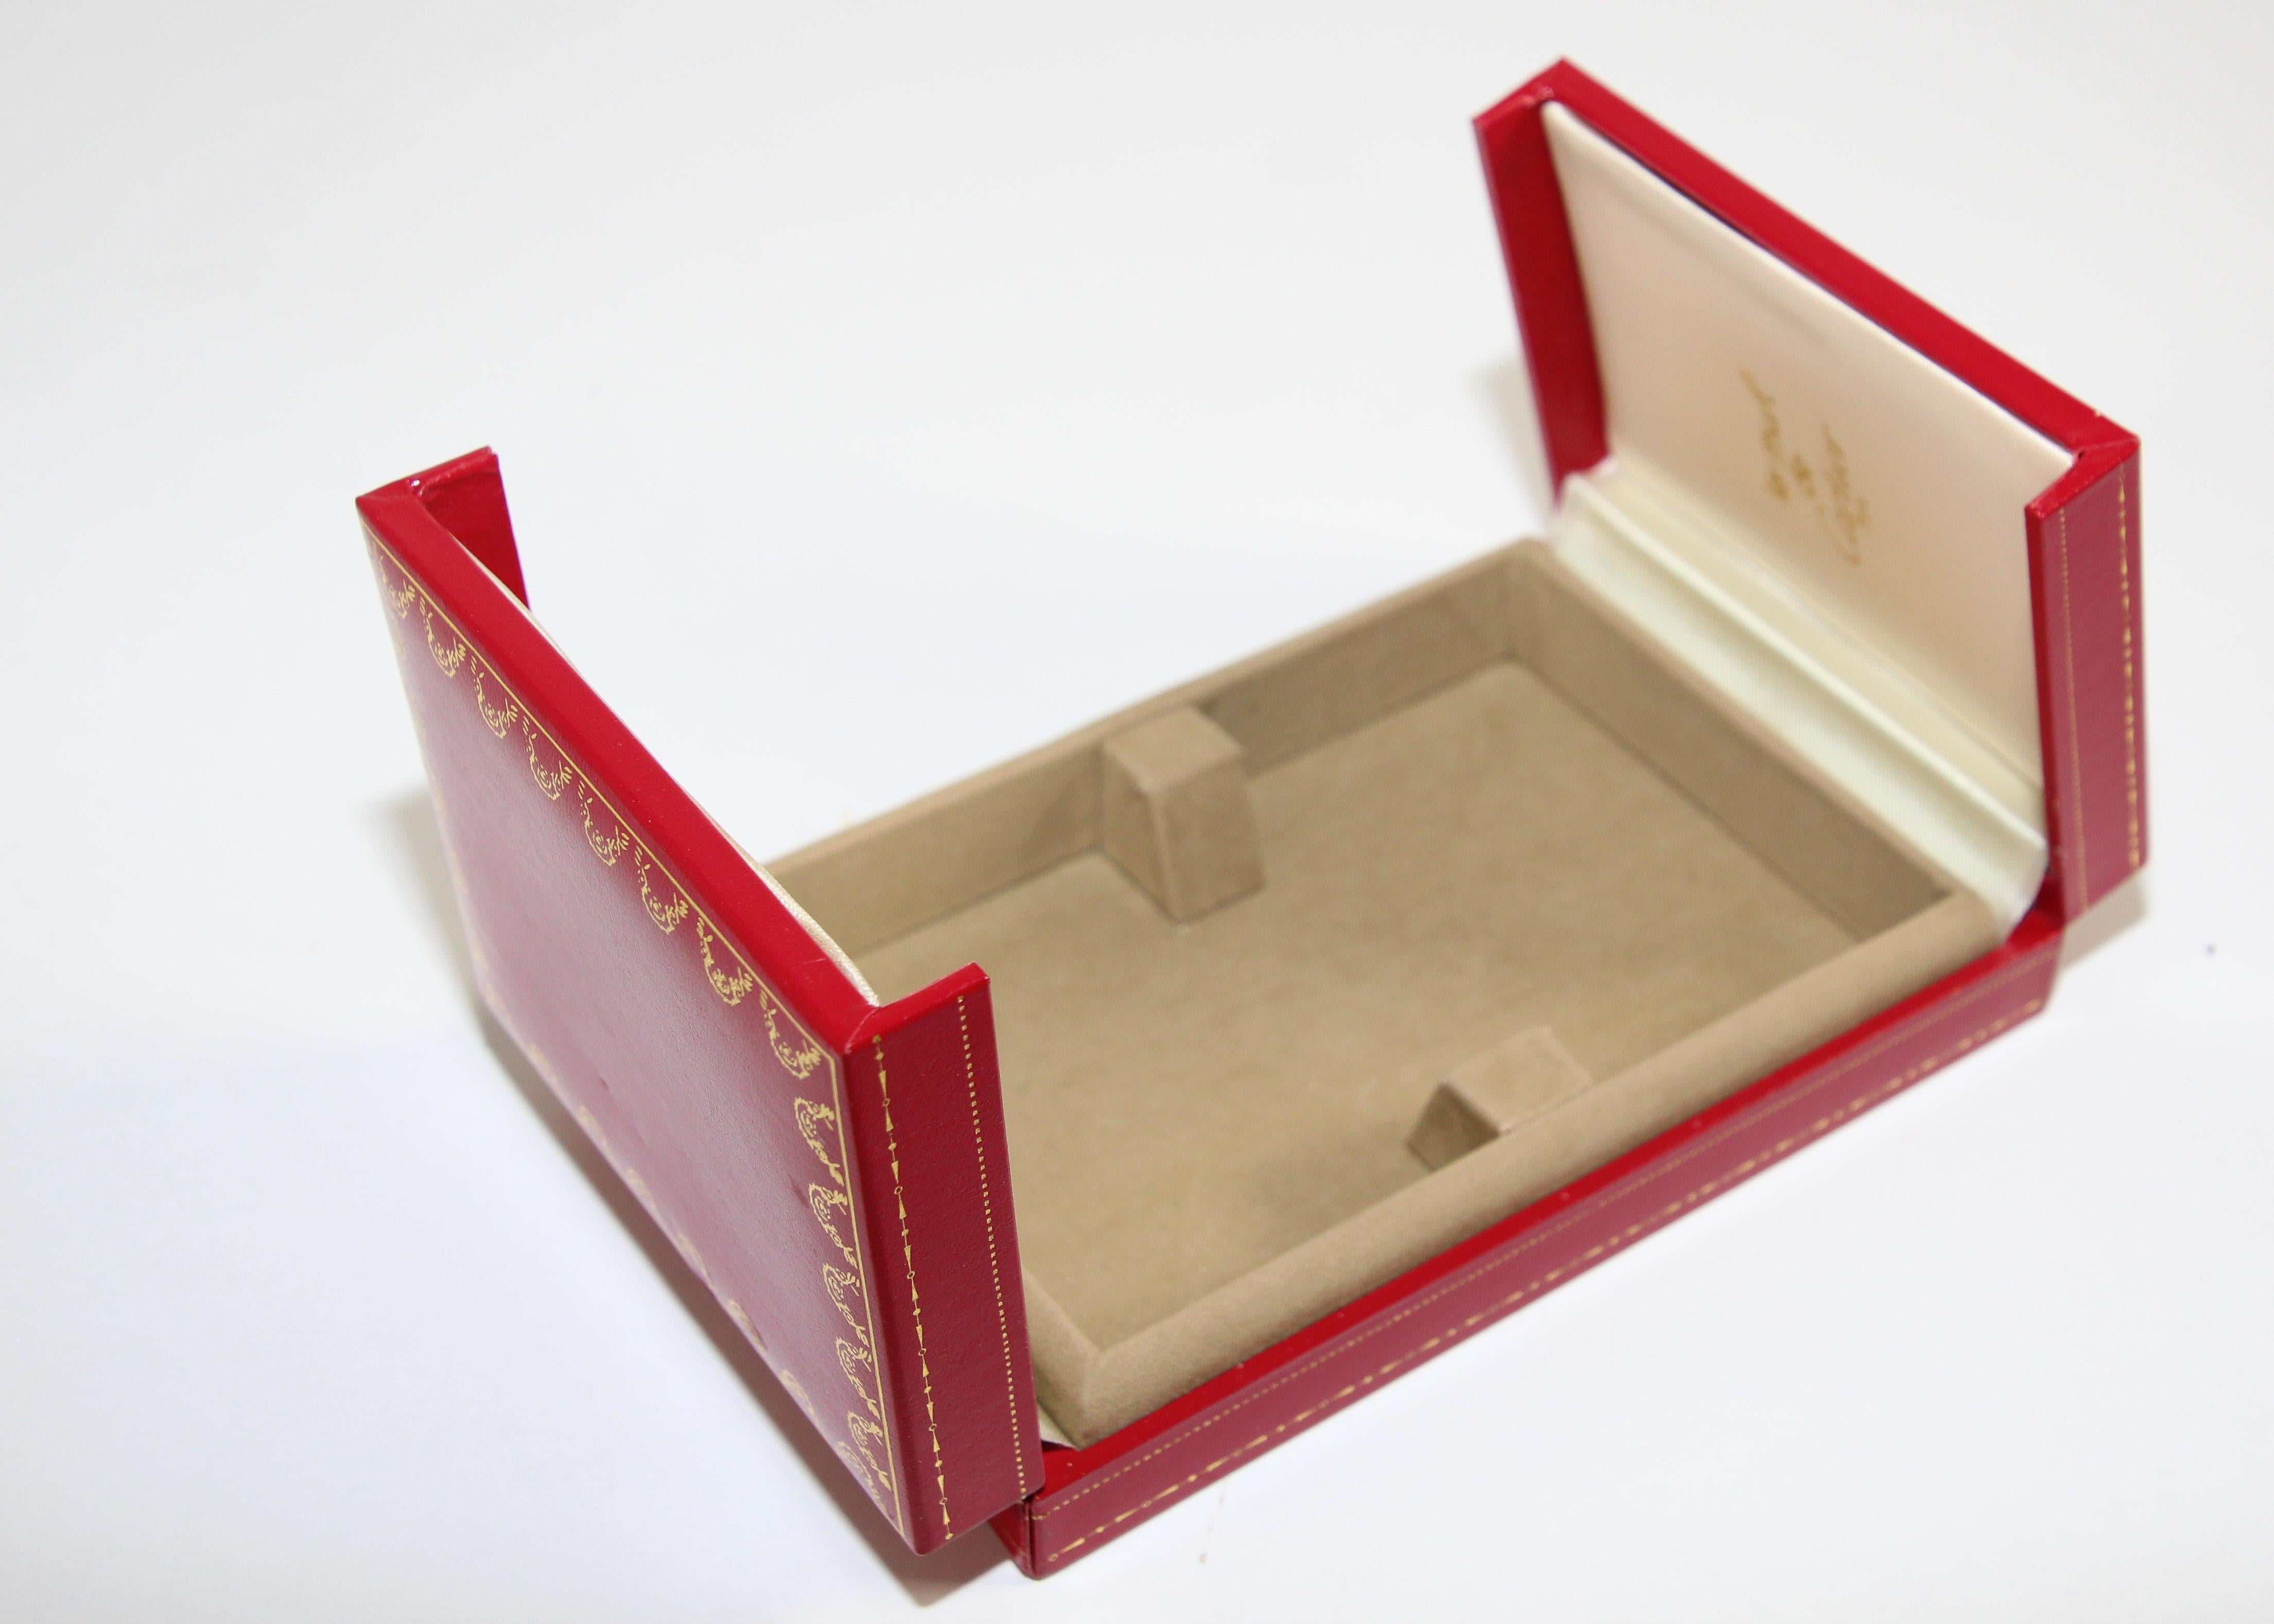 Hand-Crafted Must De Cartier Paris Vintage Playing Poker or Bridge Cards in Red Original Box